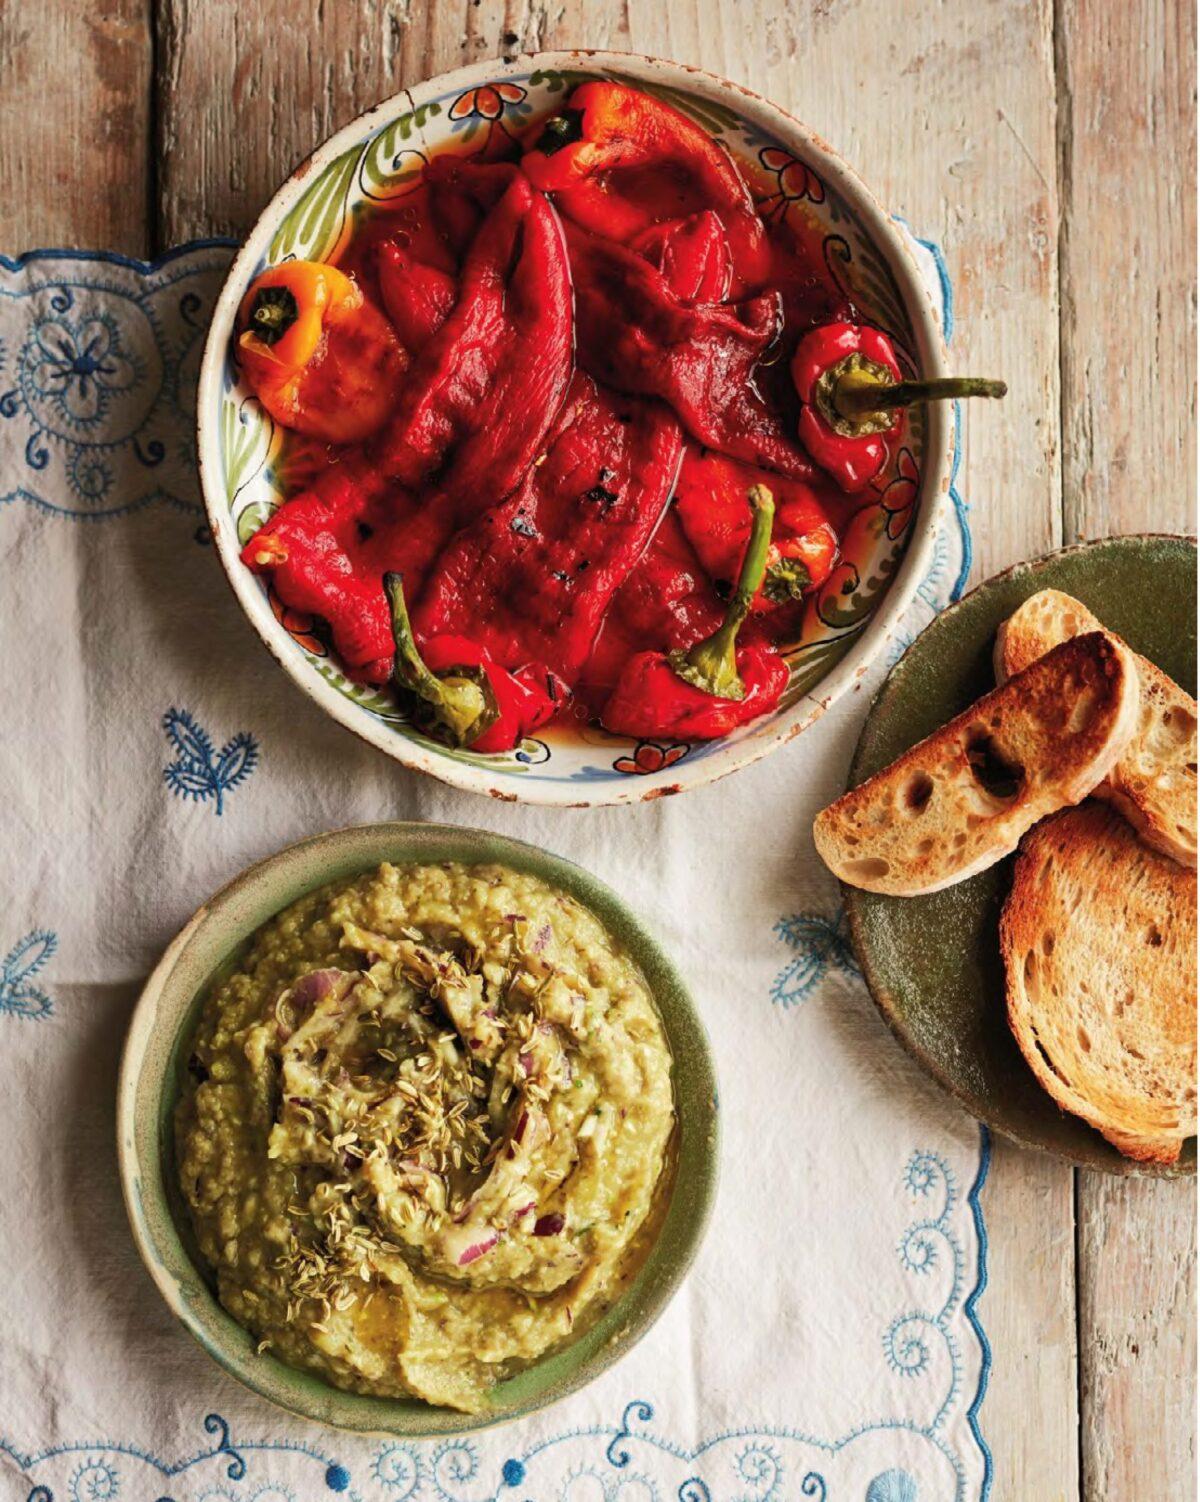 These roasted peppers and eggplant dip are always on a table of Romanian starters, and always together. (Jamie Orlando Smith Photography)